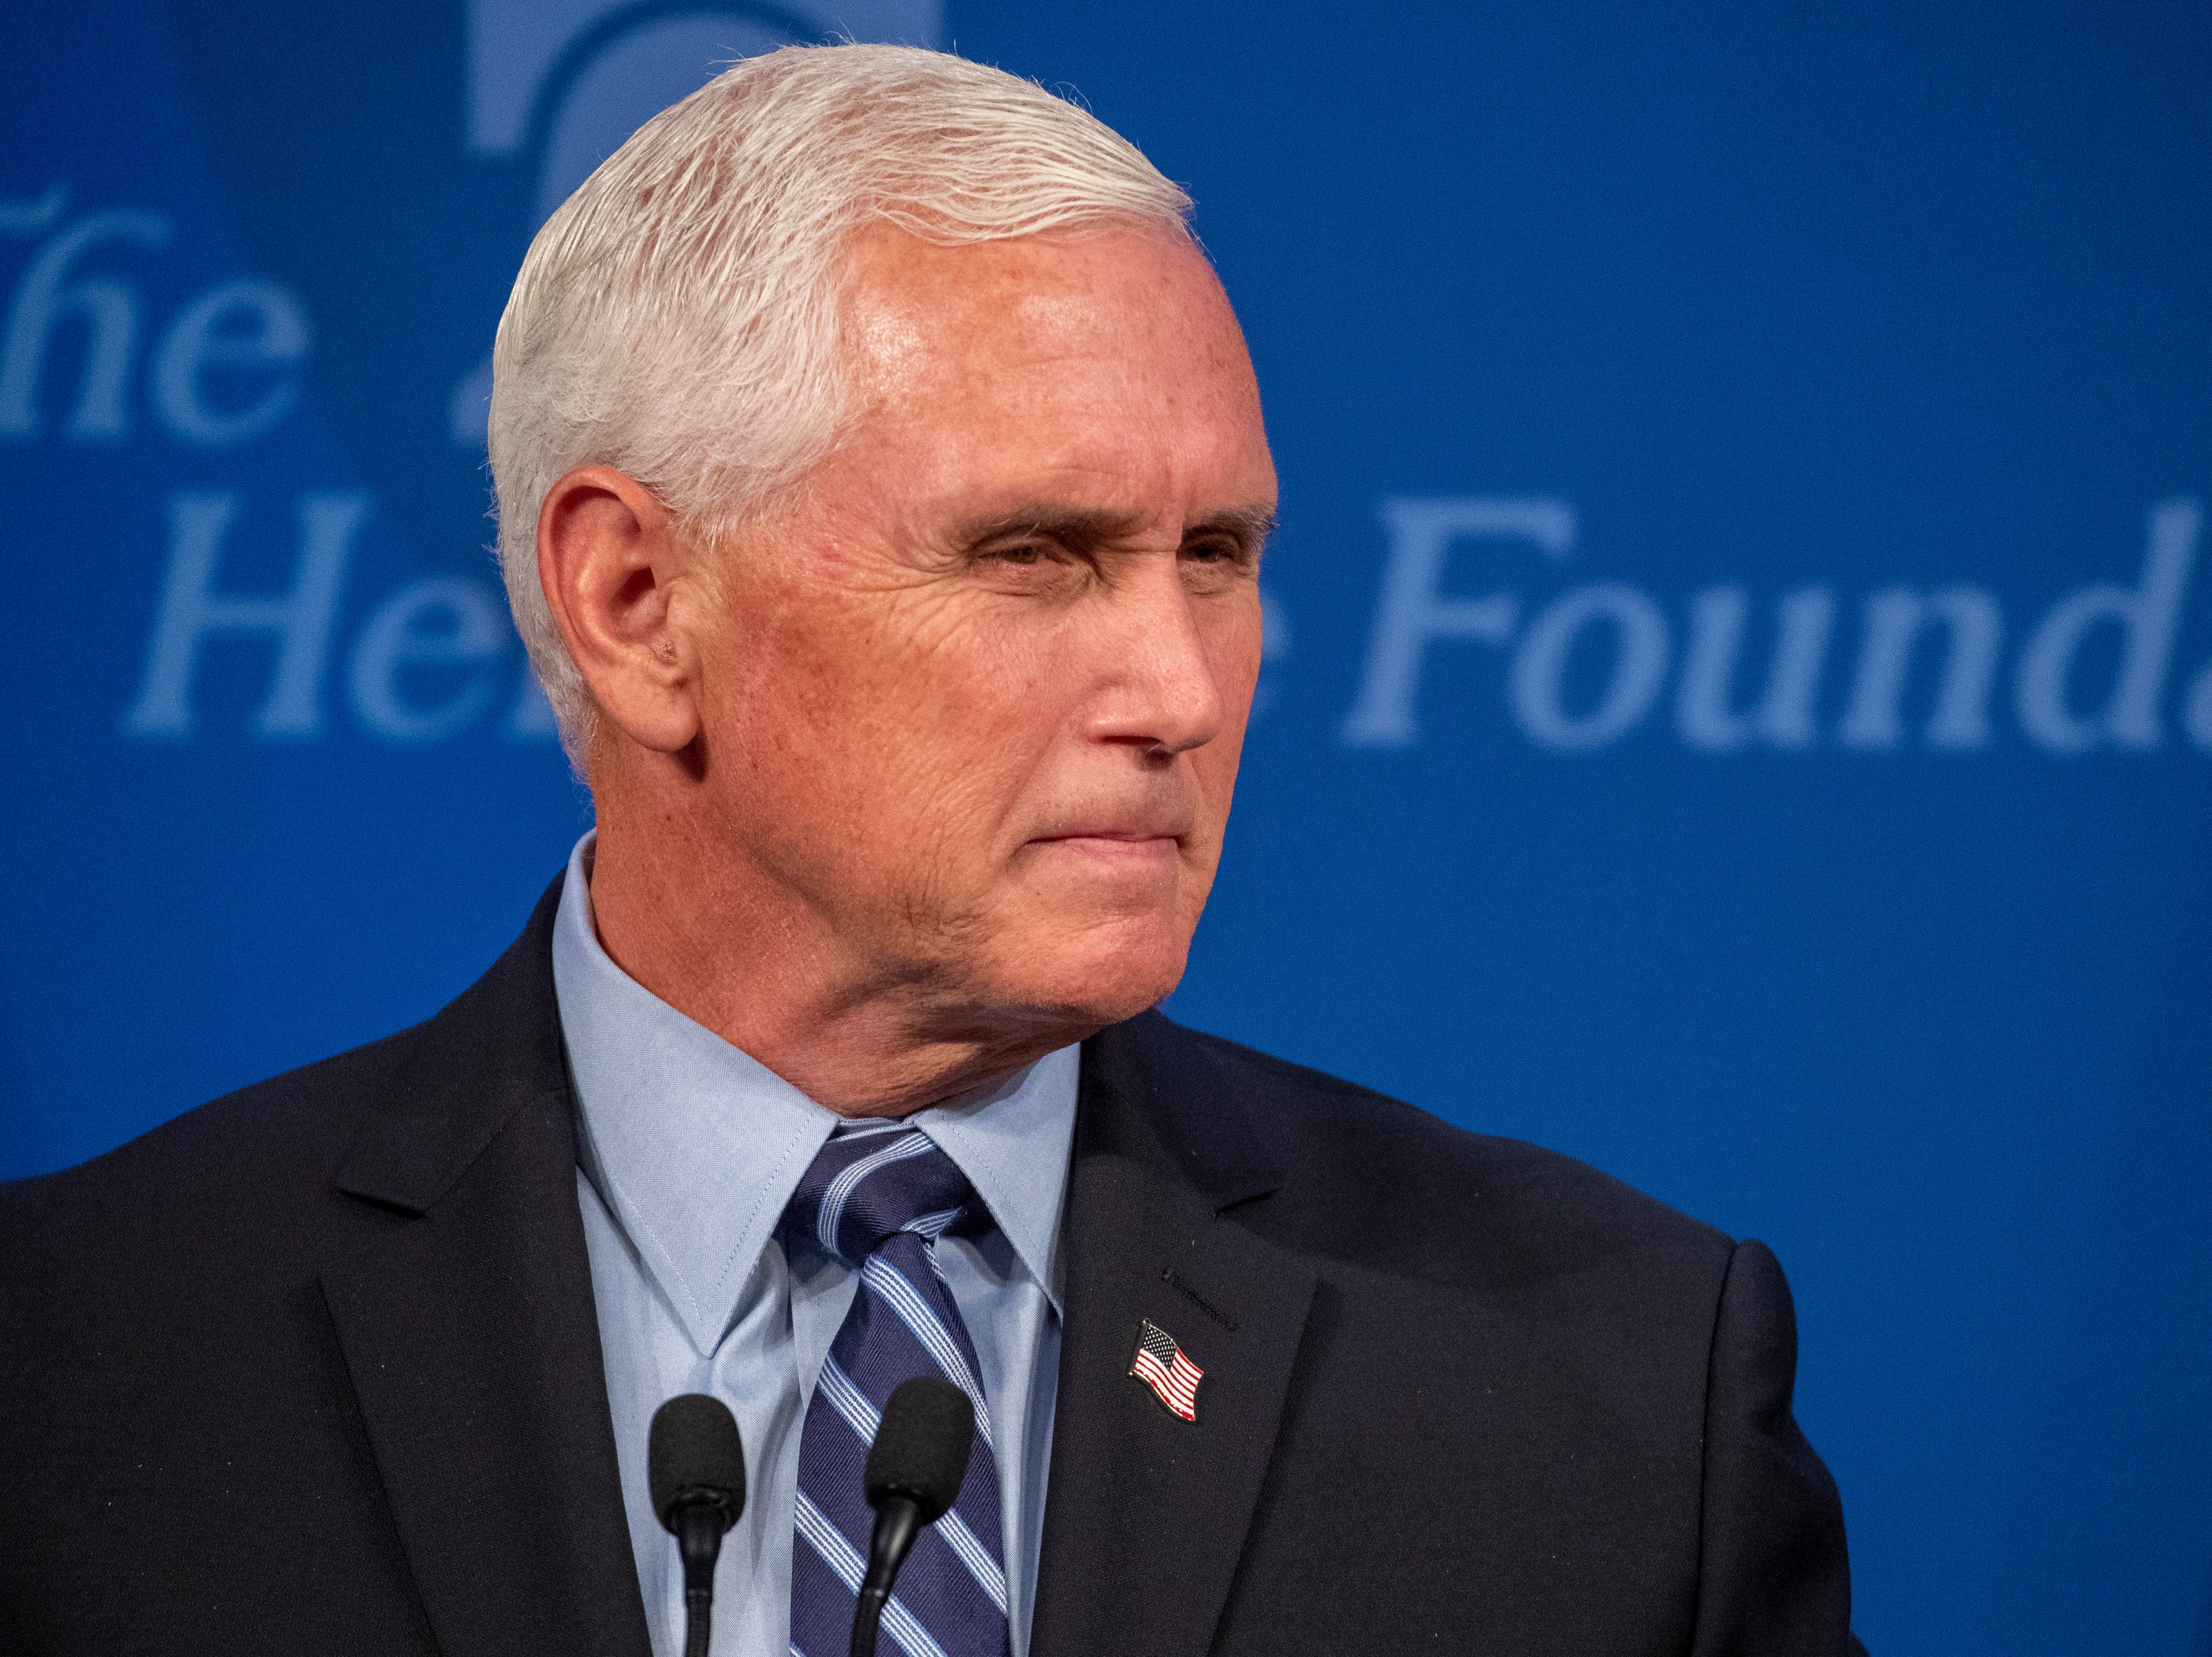 Former US Vice President Mike Pence delivers a China policy speech at The Heritage Foundation, a conservative think tank, in Washington, DC, USA, 14 July 2021